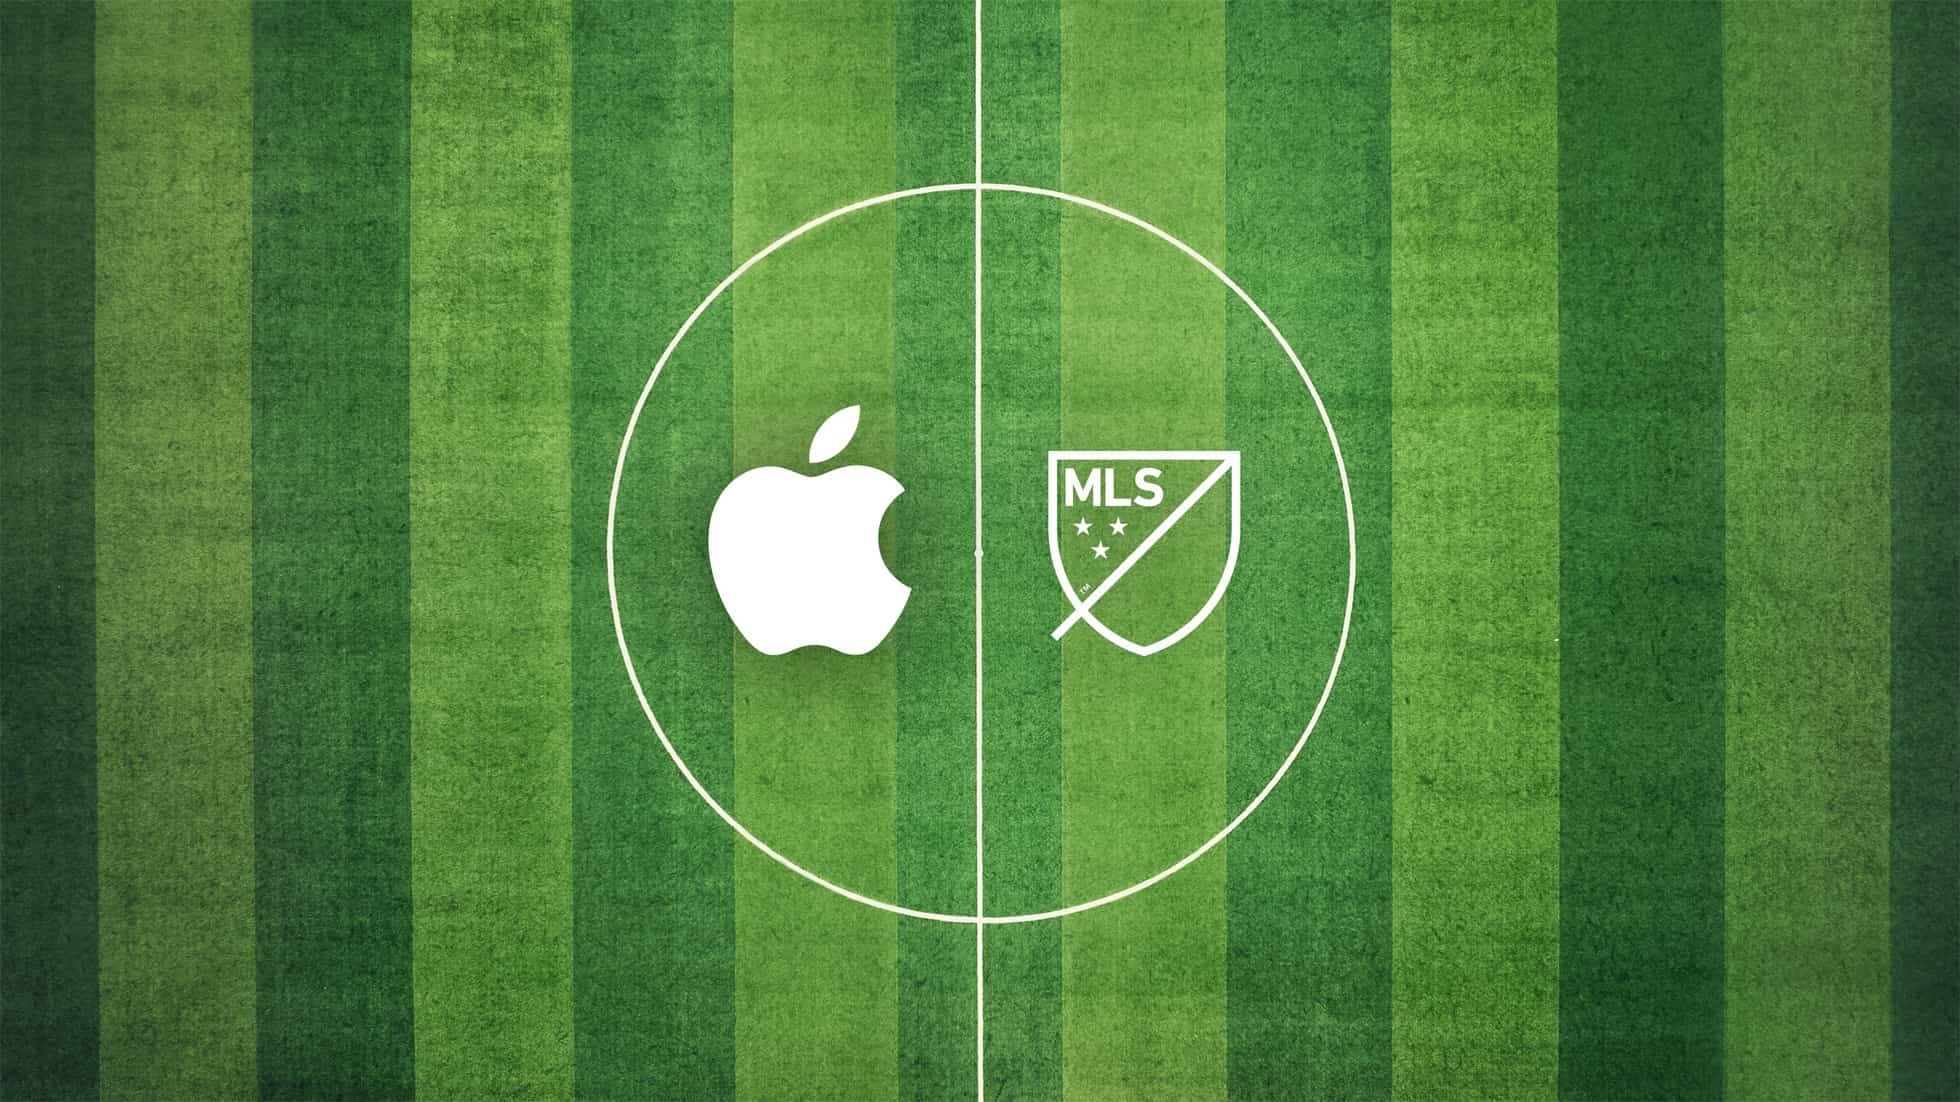 This marketing image from Apple illustrates an exclusive ten-year content streaming partnership between Apple and Major League Soccer, which starts in 2023